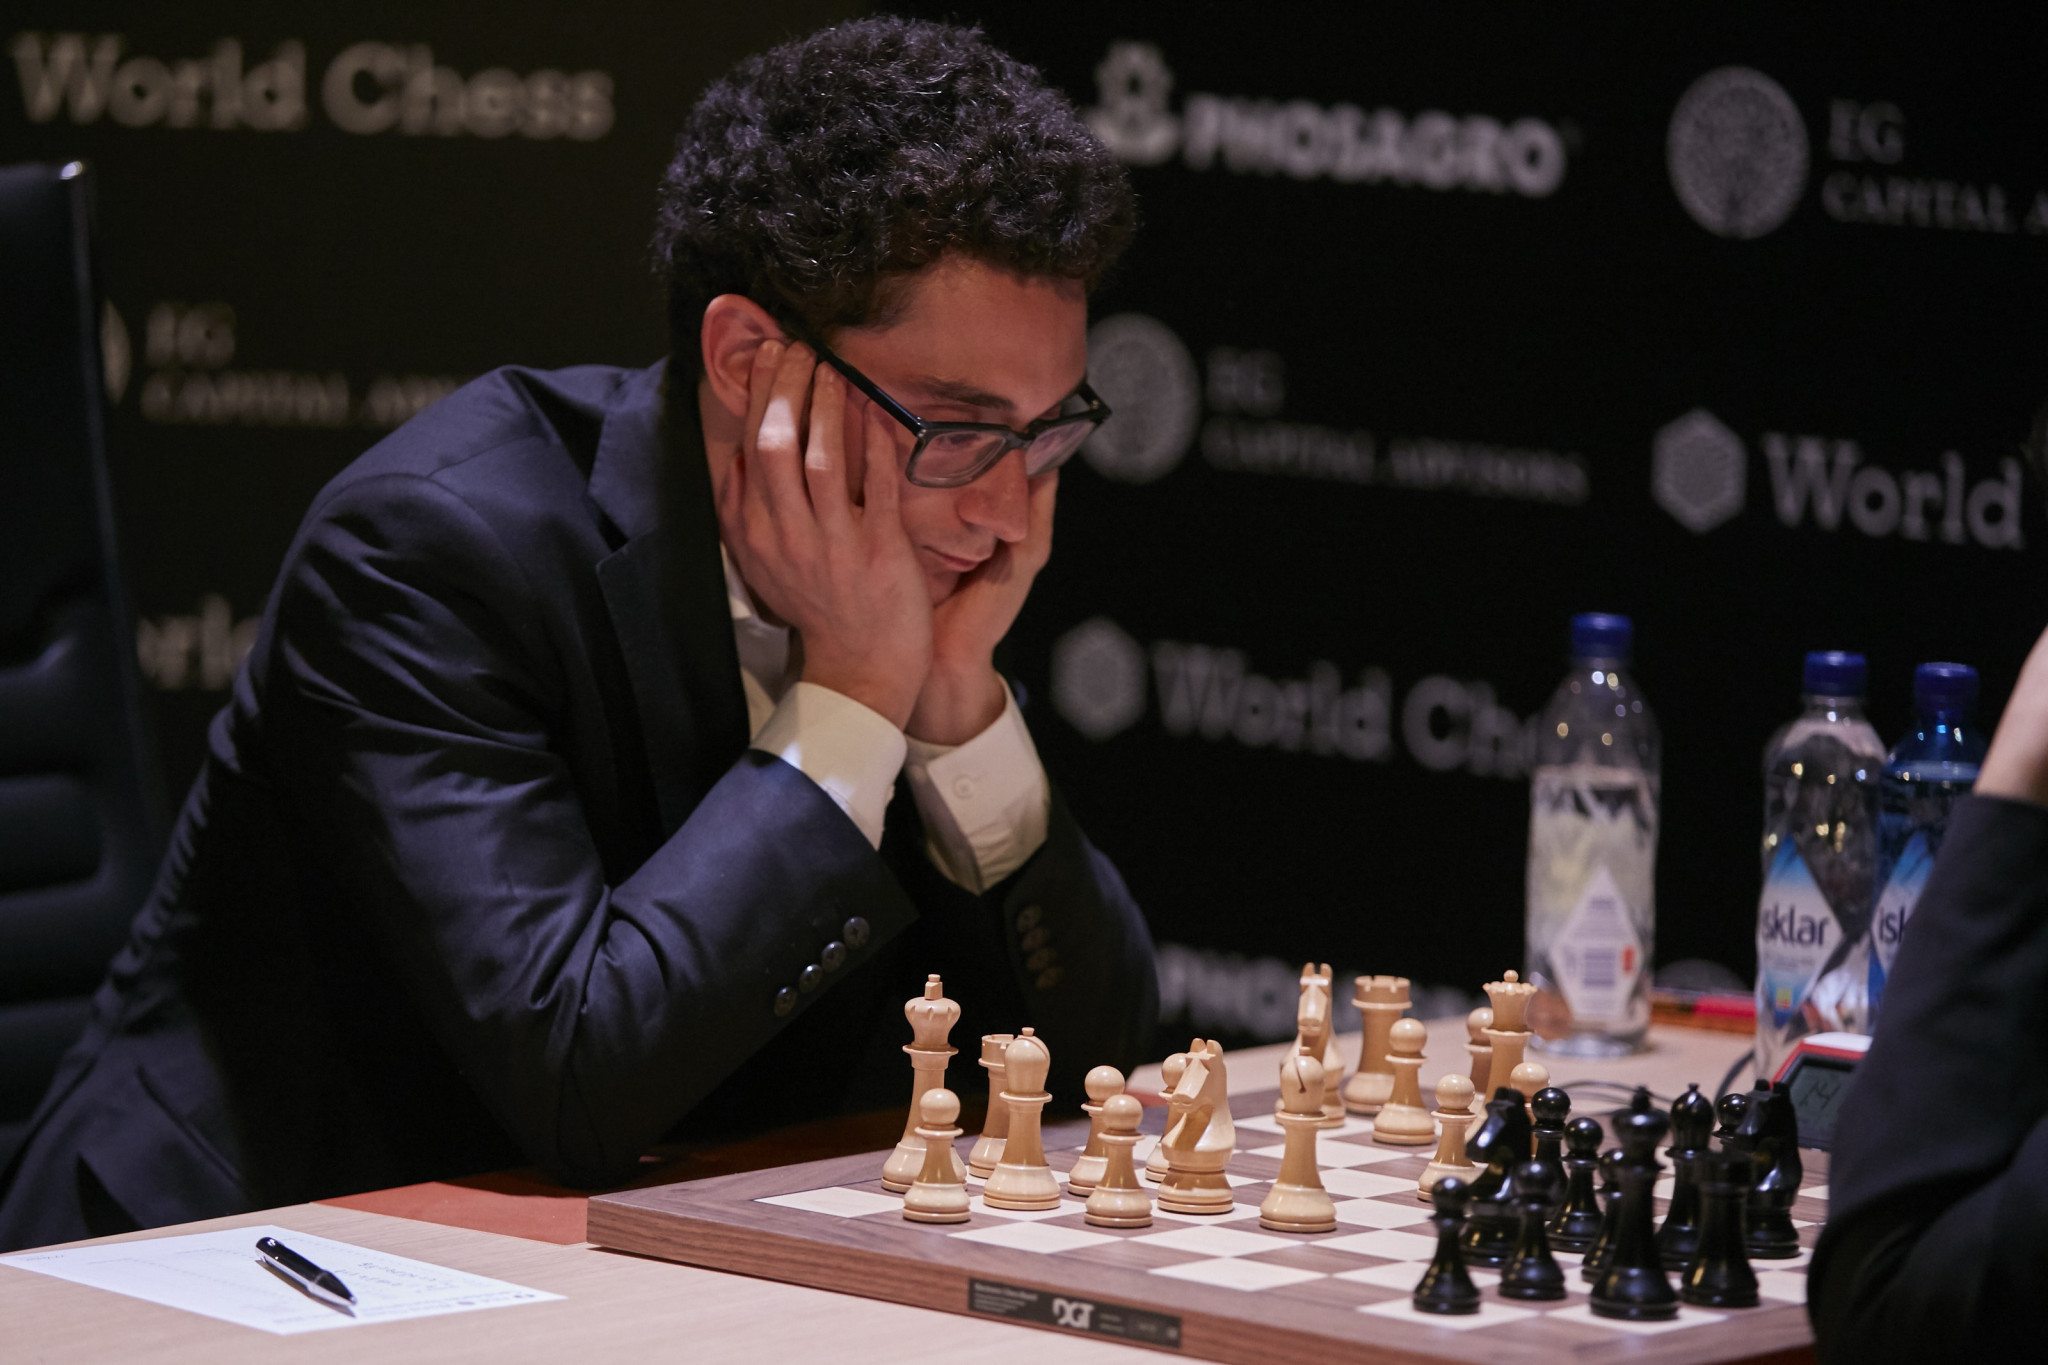 The United States’ Fabiano Caruana will compete for Magnus Carlsen’s World Chess Championship title in November after clinching victory at the Candidates Tournament in Berlin ©Getty Images